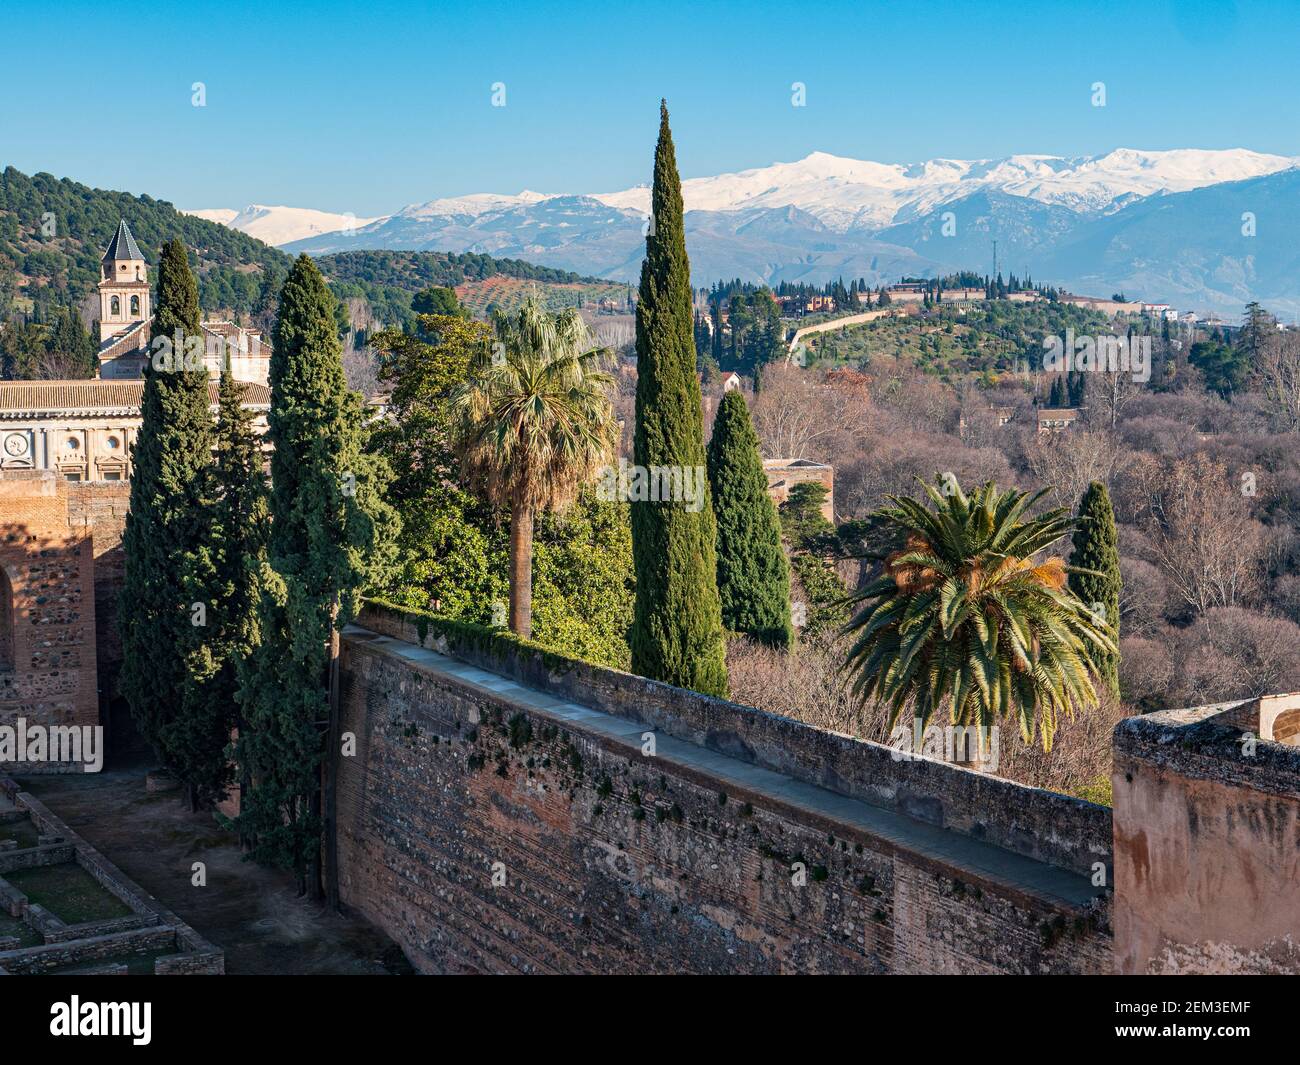 A view towards the snowcapped Sierra Nevada Mountains from The Alhambra, Granada, Spain. Stock Photo